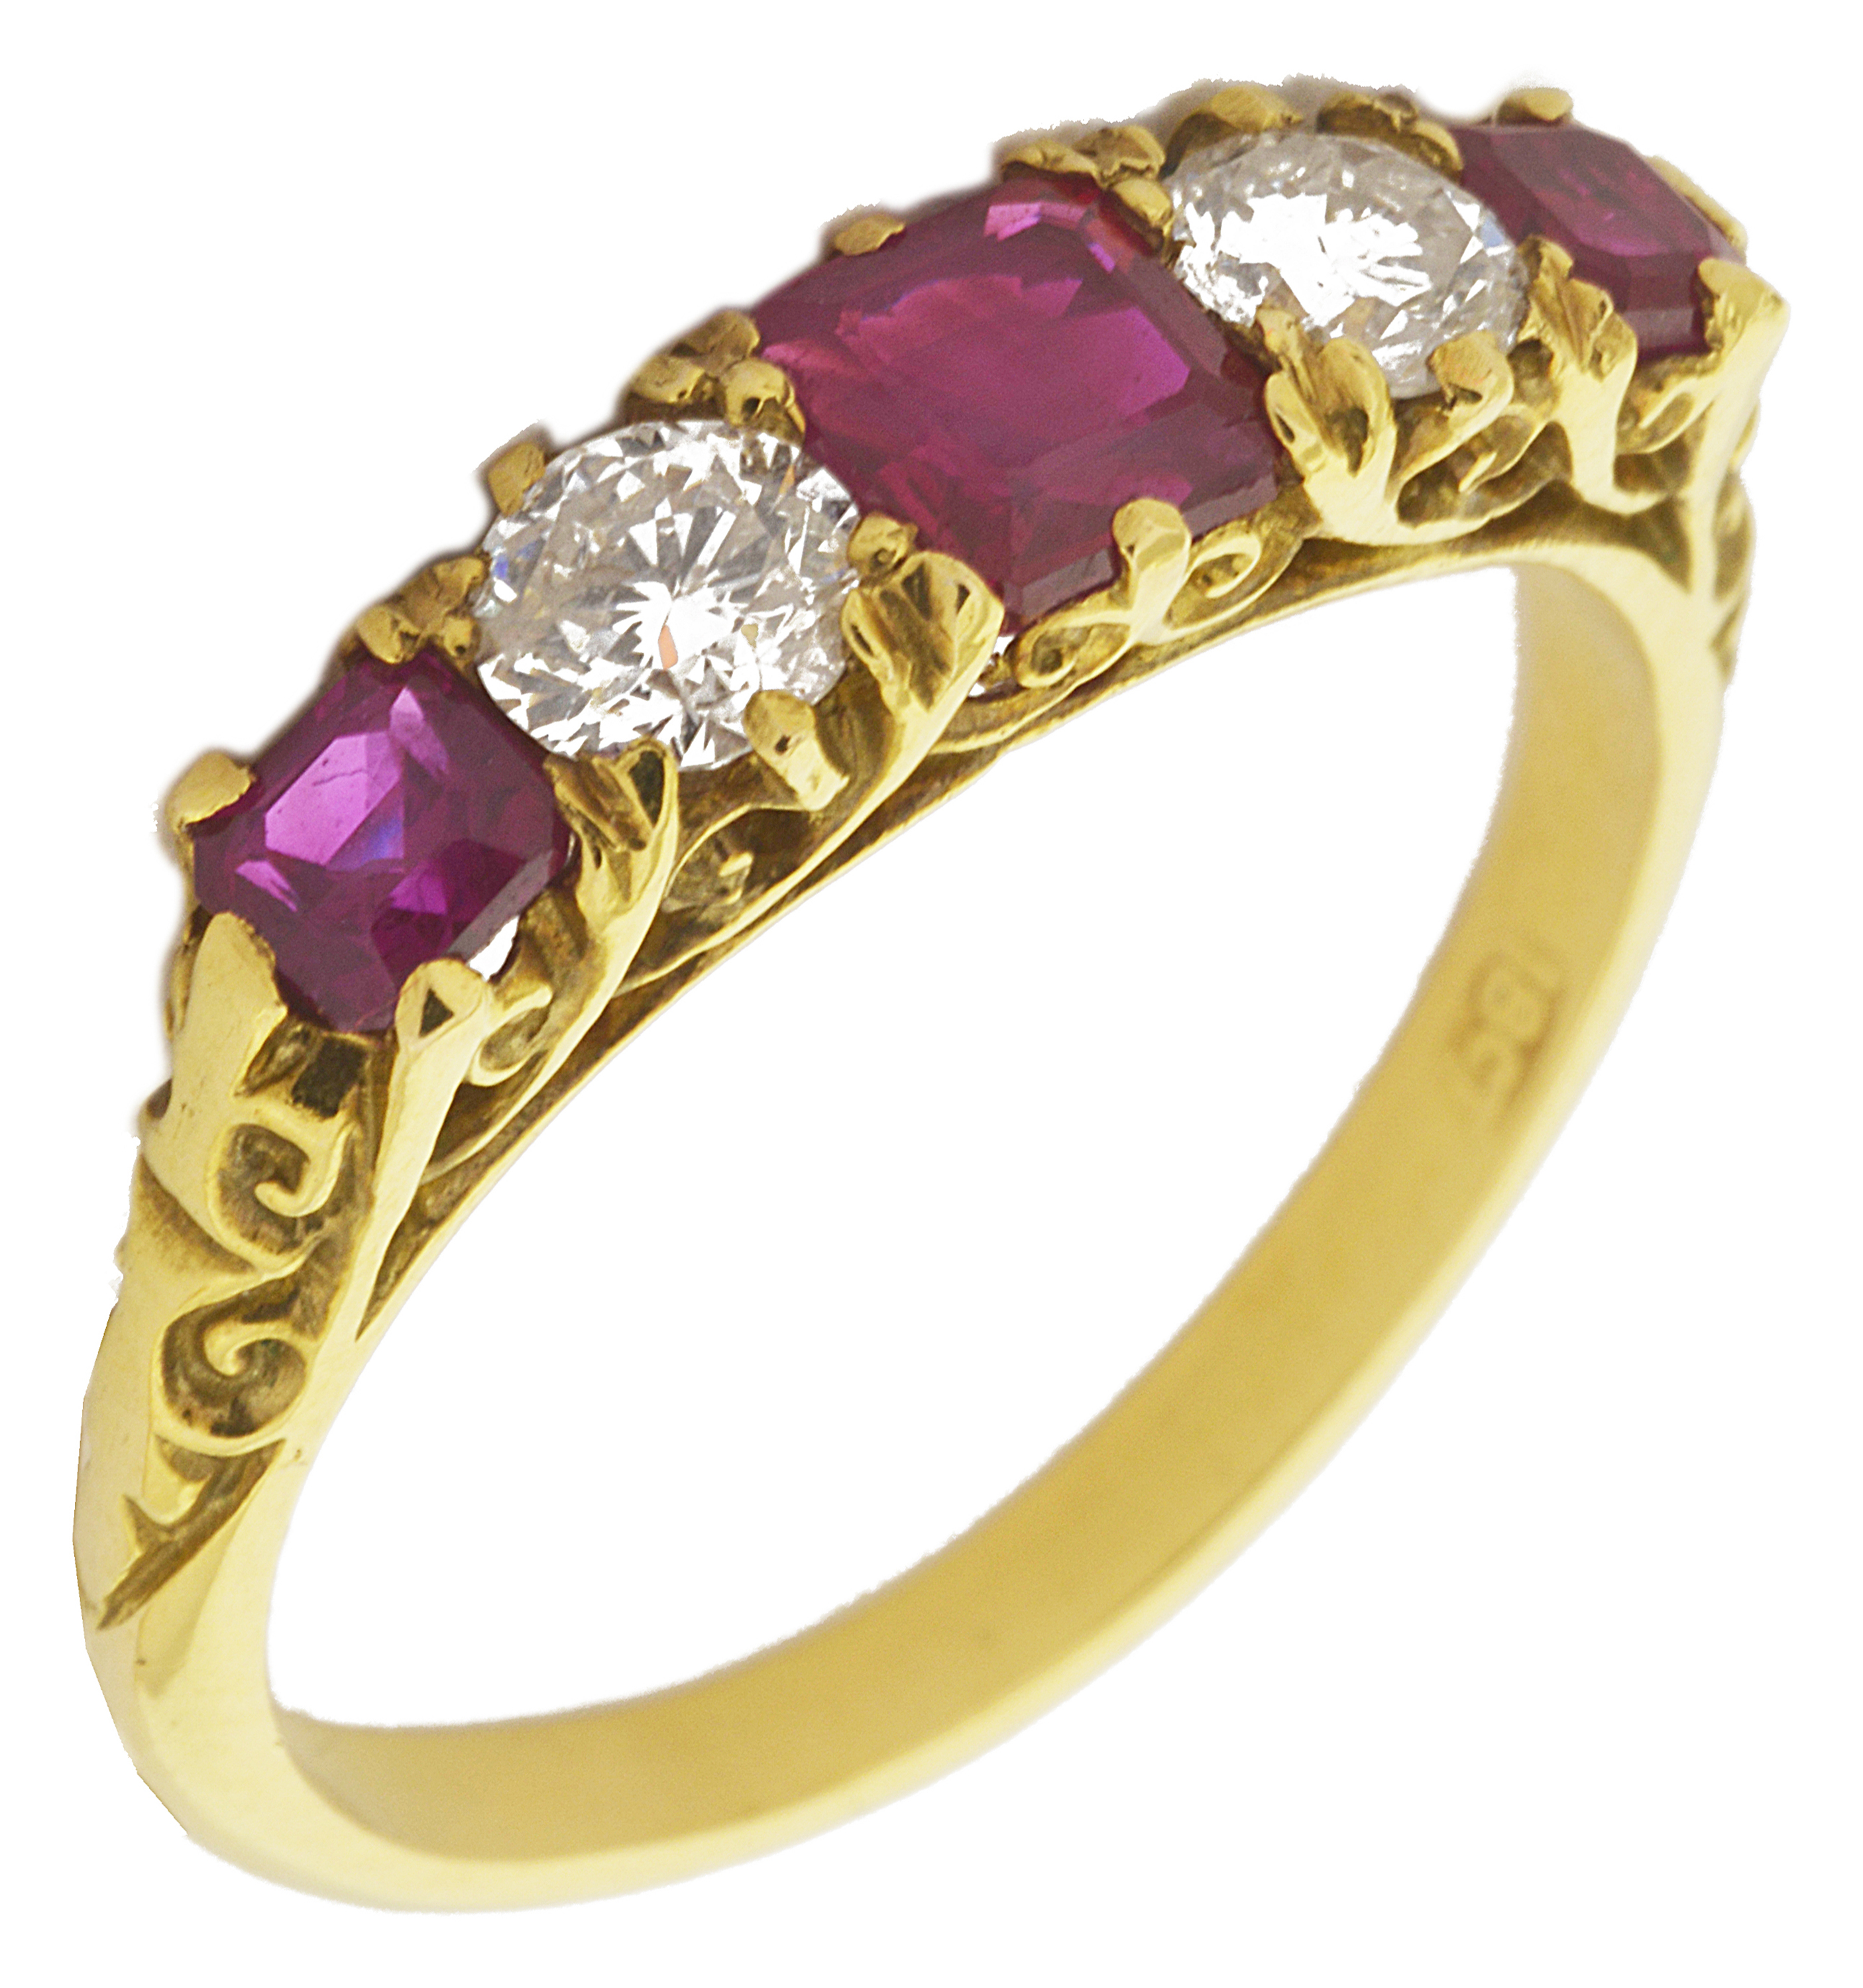 An 18ct gold mounted ruby and diamond five stone ring set with a central square cut ruby flanked